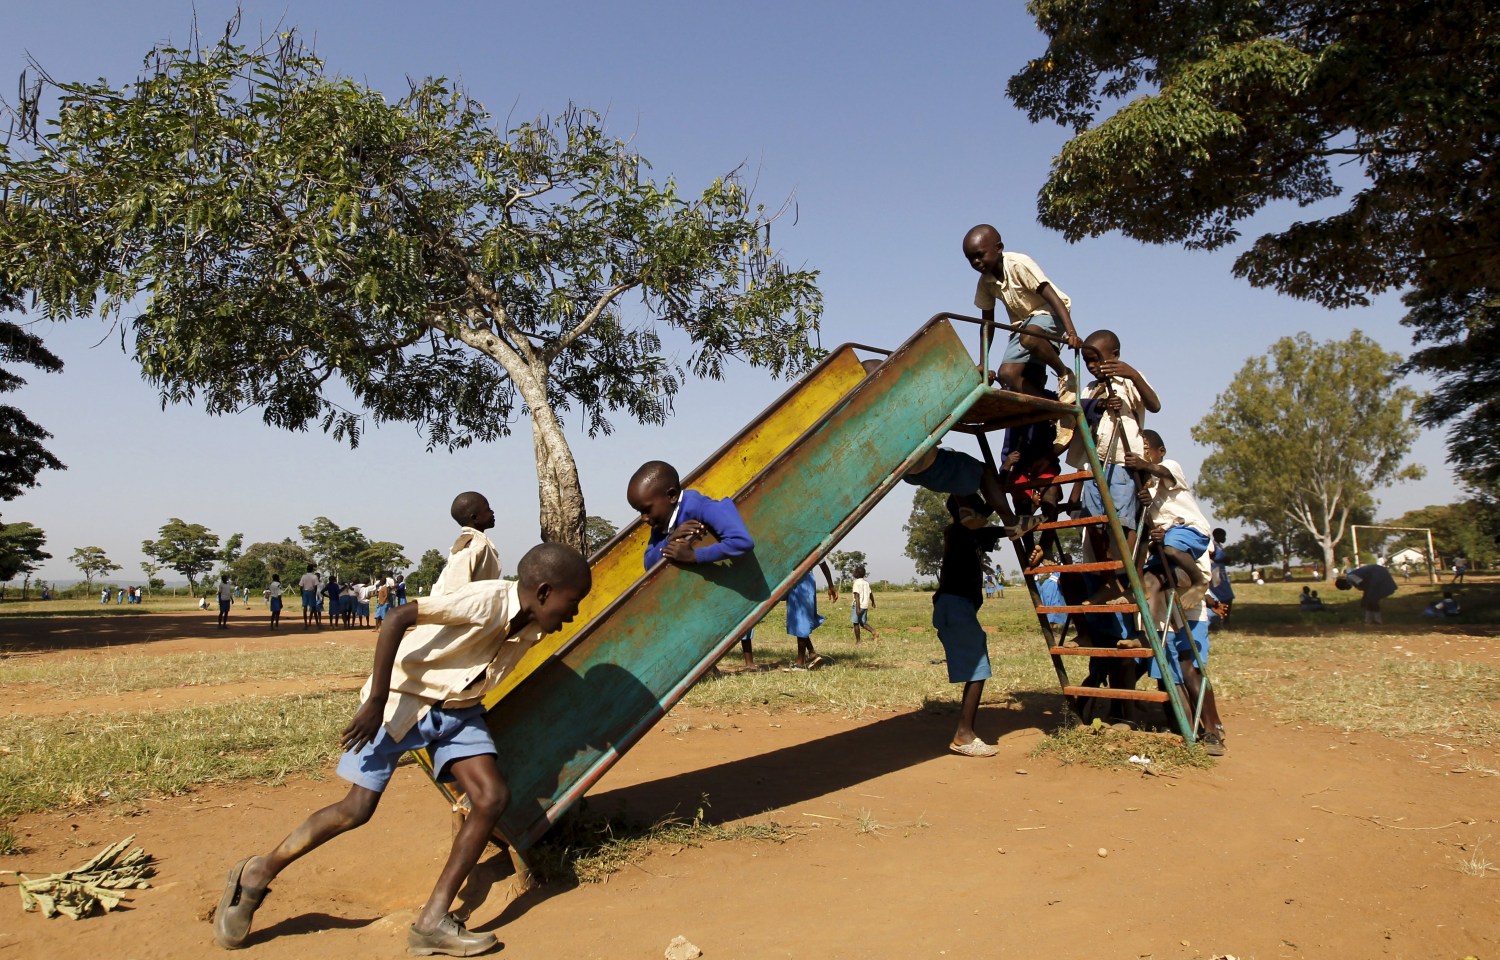 Pupils play during breaktime at the Senator Obama primary school in the village of Nyang'oma Kogelo, west of Kenya's capital Nairobi, July 16, 2015. U.S. President Barack Obama visits Kenya and Ethiopia later this month. His ancestral home of Kogelo is home to Sarah Hussein Obama, his step-grandmother. The Kenyan village, burial place of Obama's father, features an open-pit goldmine, a pork butcher's, a school named after their most famous son and outdoor market stalls. Villagers get around by motorbike taxi or on foot while a donkey-cart transports water. Children, some of them named Obama in honour of the President, walk to and from school together. Picture taken July 16, 2015. REUTERS/Thomas MukoyaPICTURE 17 OF 35 FOR WIDER IMAGE STORY "KOGELO, KENYA - OBAMA'S ANCESTRAL HOME". SEARCH "ANCESTRAL MUKOYA" FOR ALL IMAGES - GF10000166803